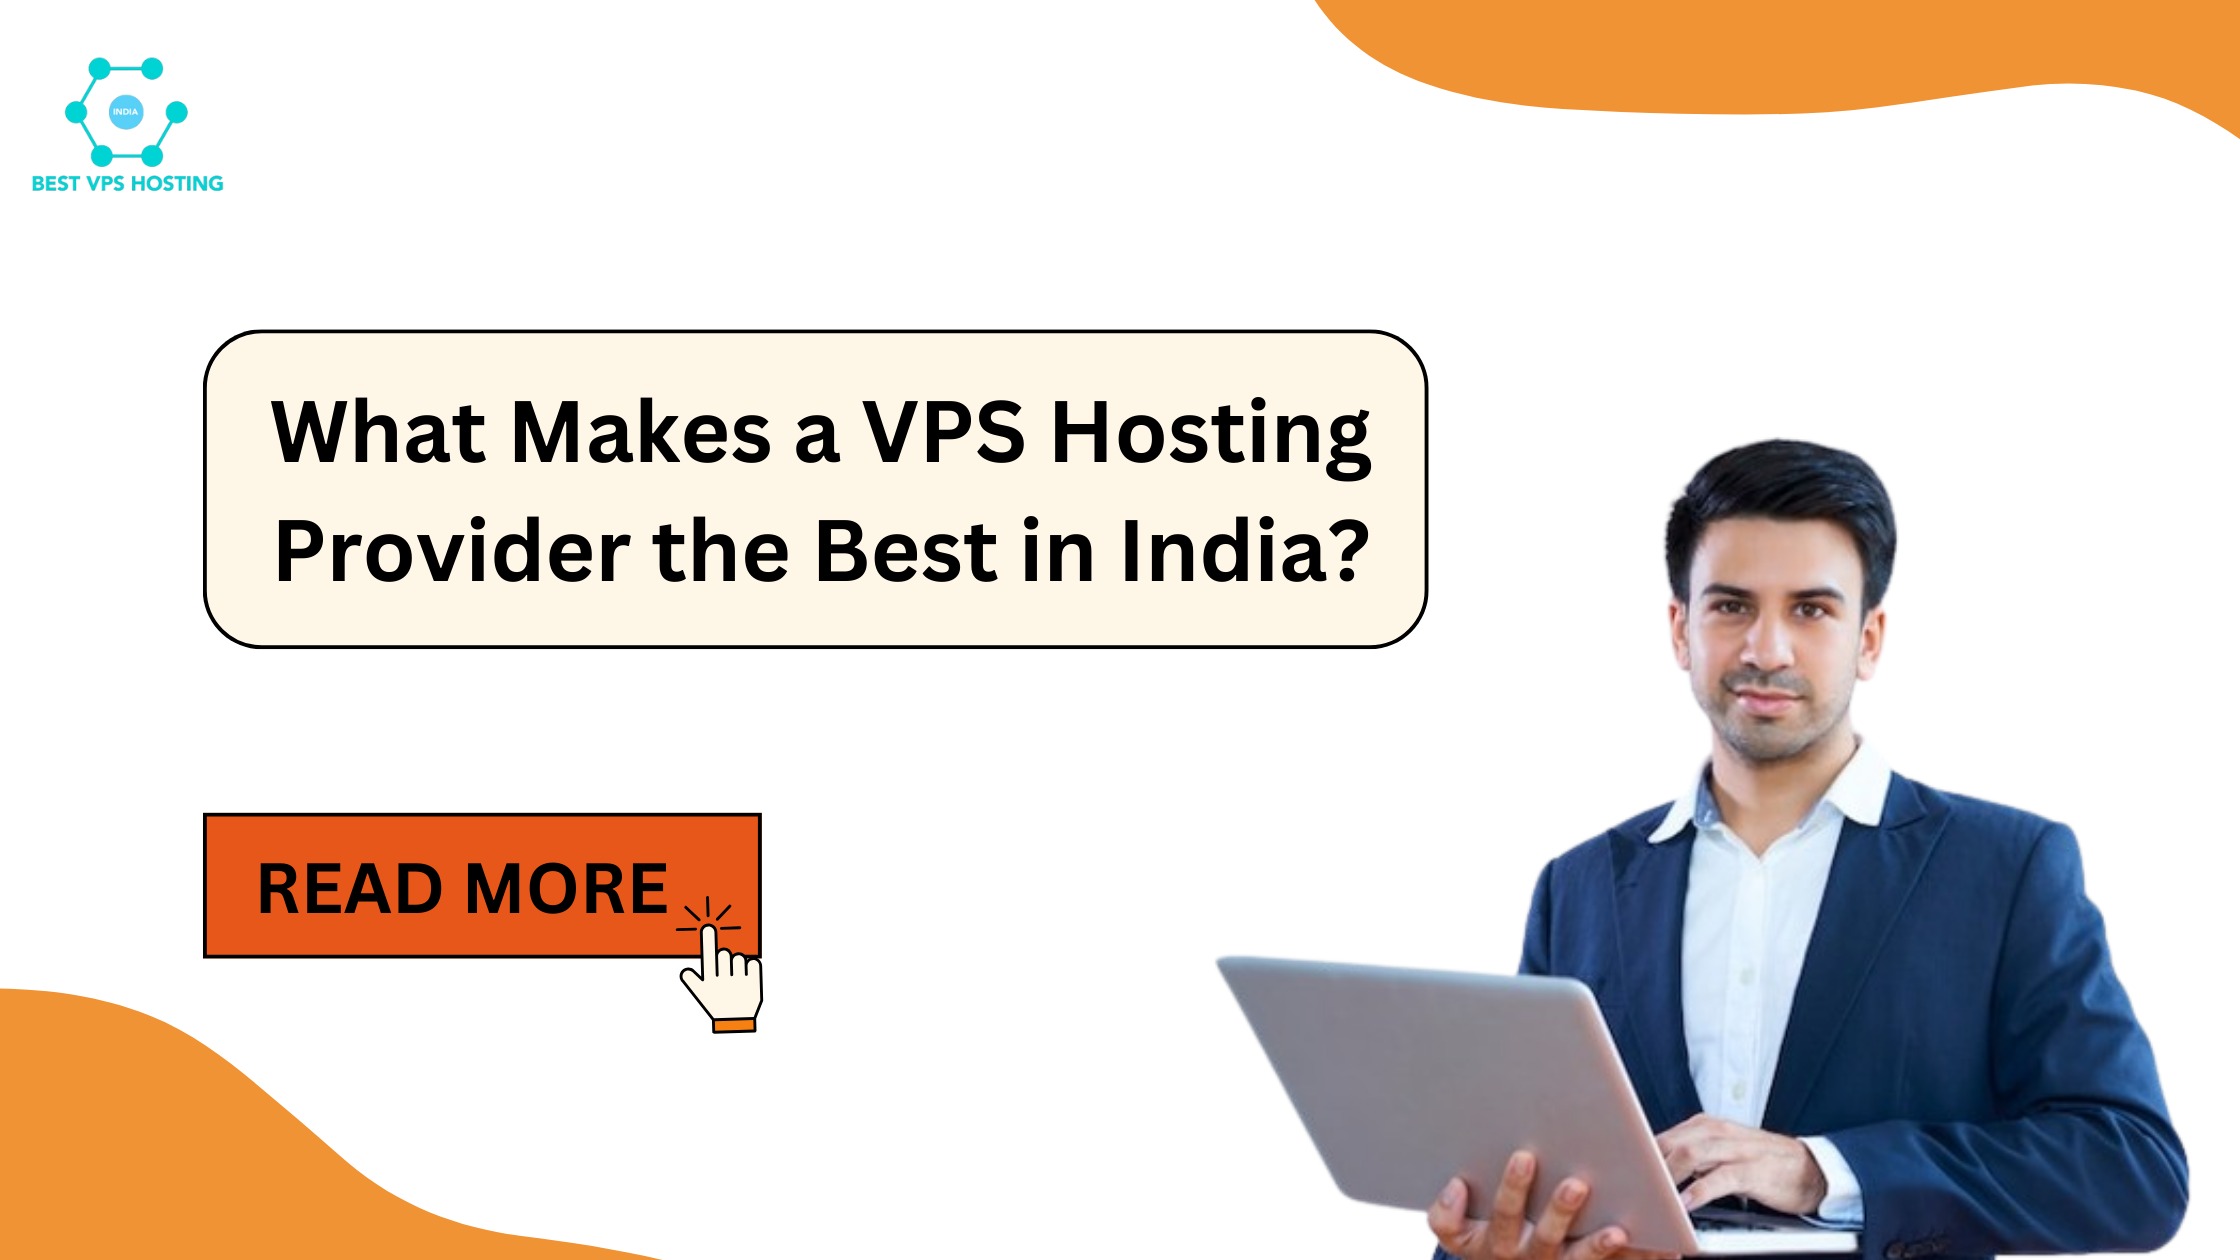 What Makes a VPS Hosting Provider the Best in India?